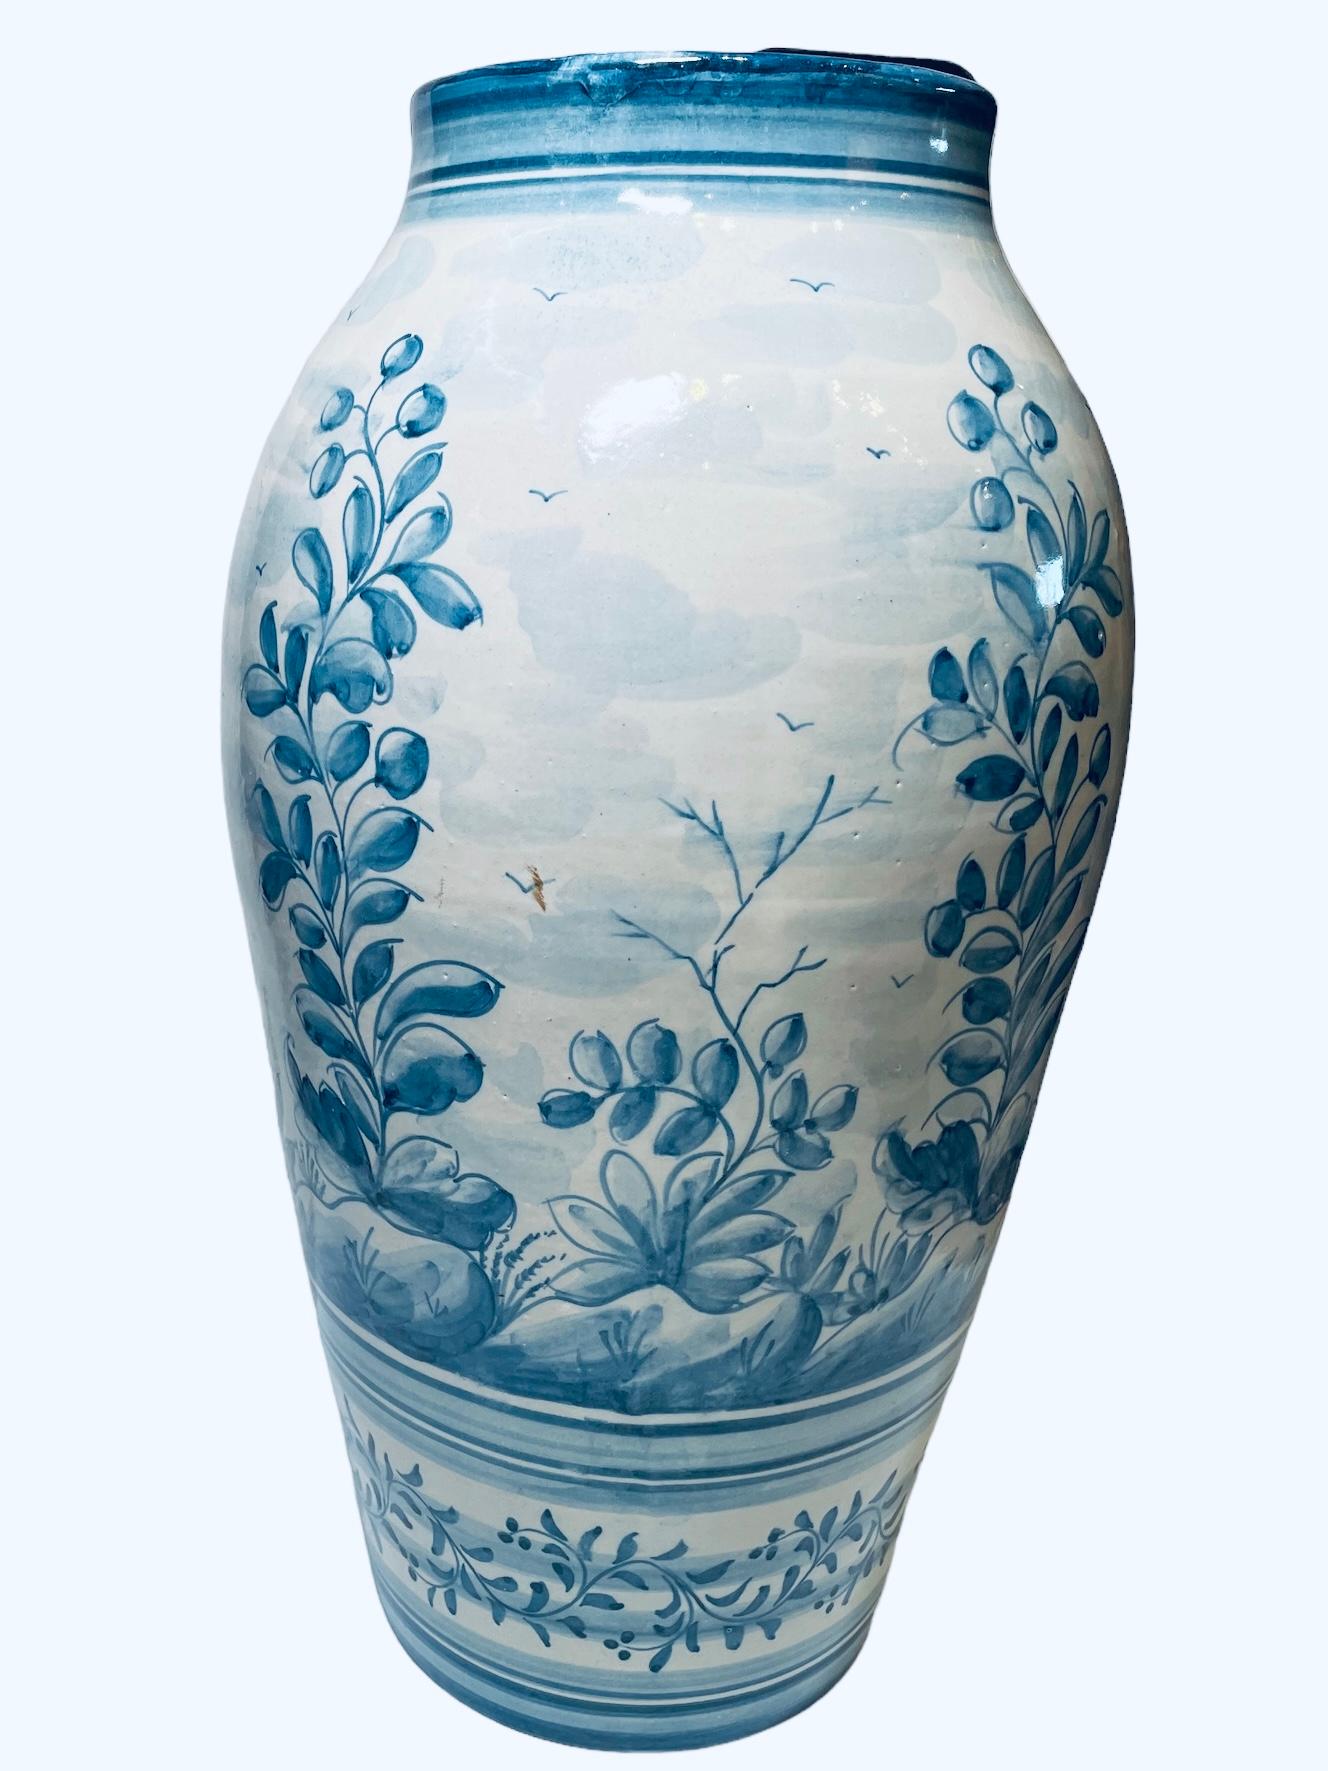 This is a Portuguese Majolica Vase Urn. It depicts a hand painted blue and white scenes of young olive trees and some birds flying in the sky. The bottom of the vase is adorned with a hand painted garland of a climbing plant. Below the vase is